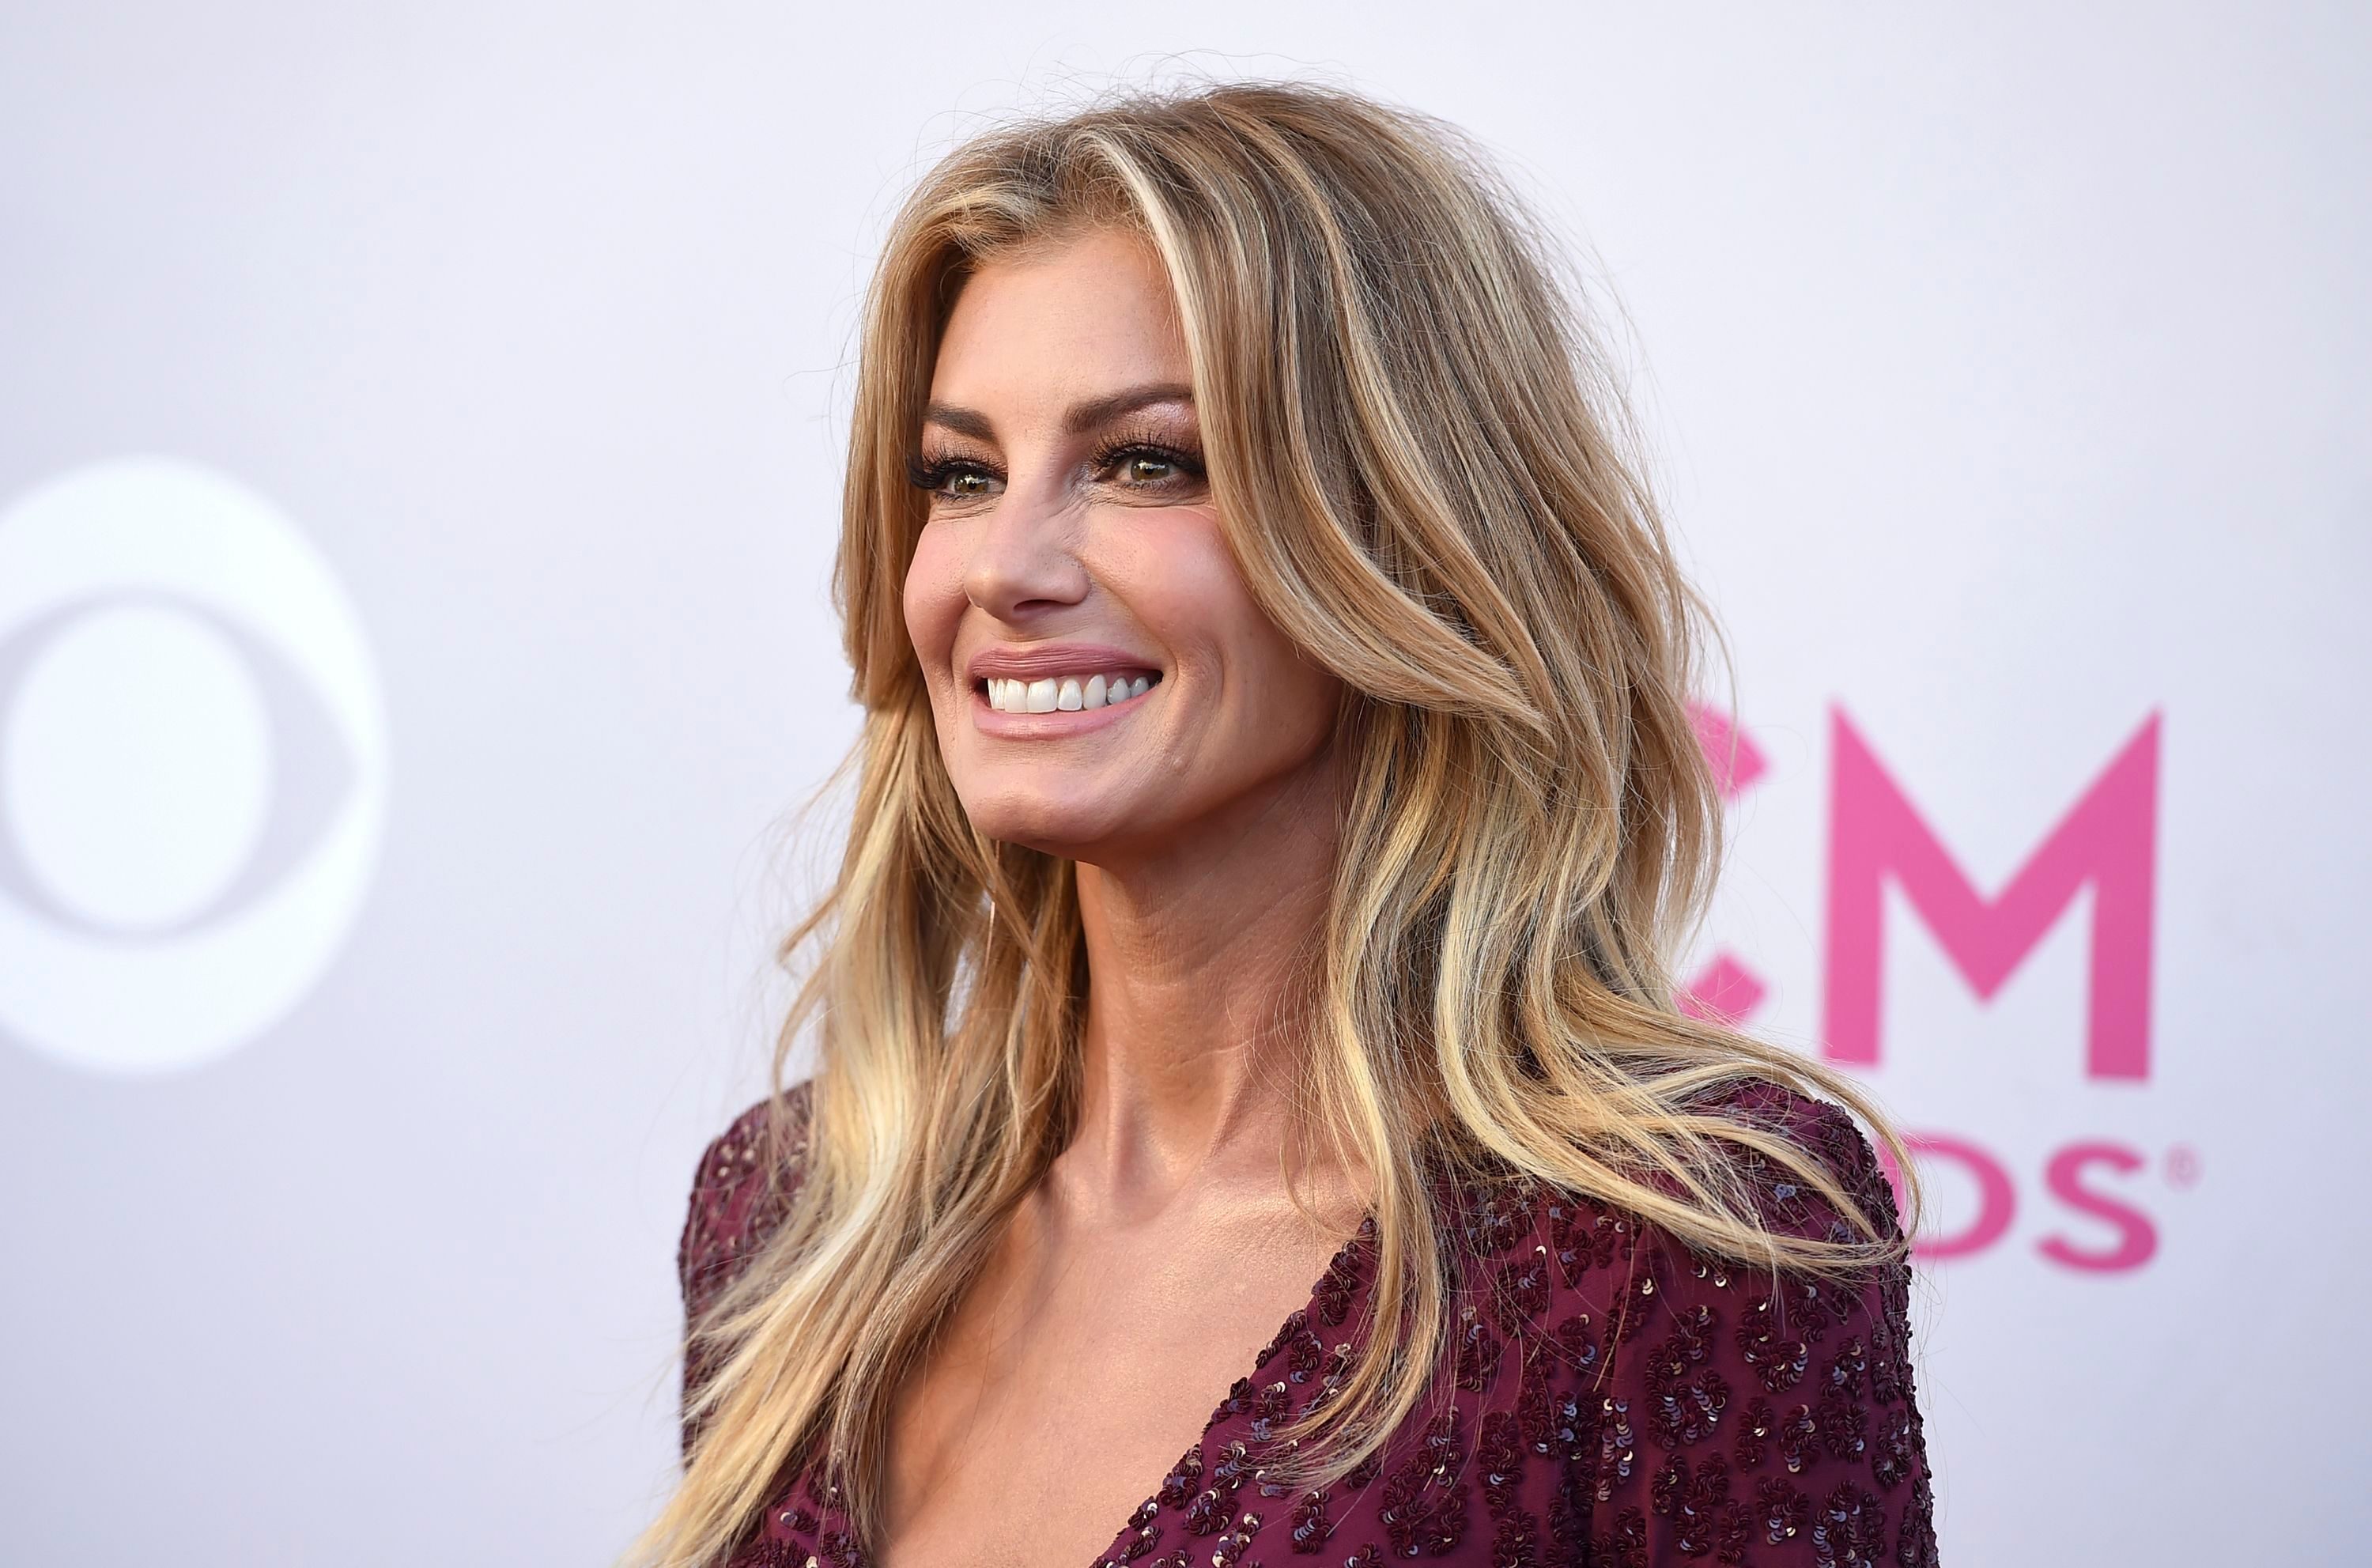 Mandatory Credit: Photo by Invision/AP/Shutterstock (9241571sg) Faith Hill arrives at the 52nd annual Academy of Country Music Awards at the T-Mobile Arena, in Las Vegas 52nd Annual Academy Of Country Music Awards - Arrivals, Las Vegas, USA - 2 Apr 2017